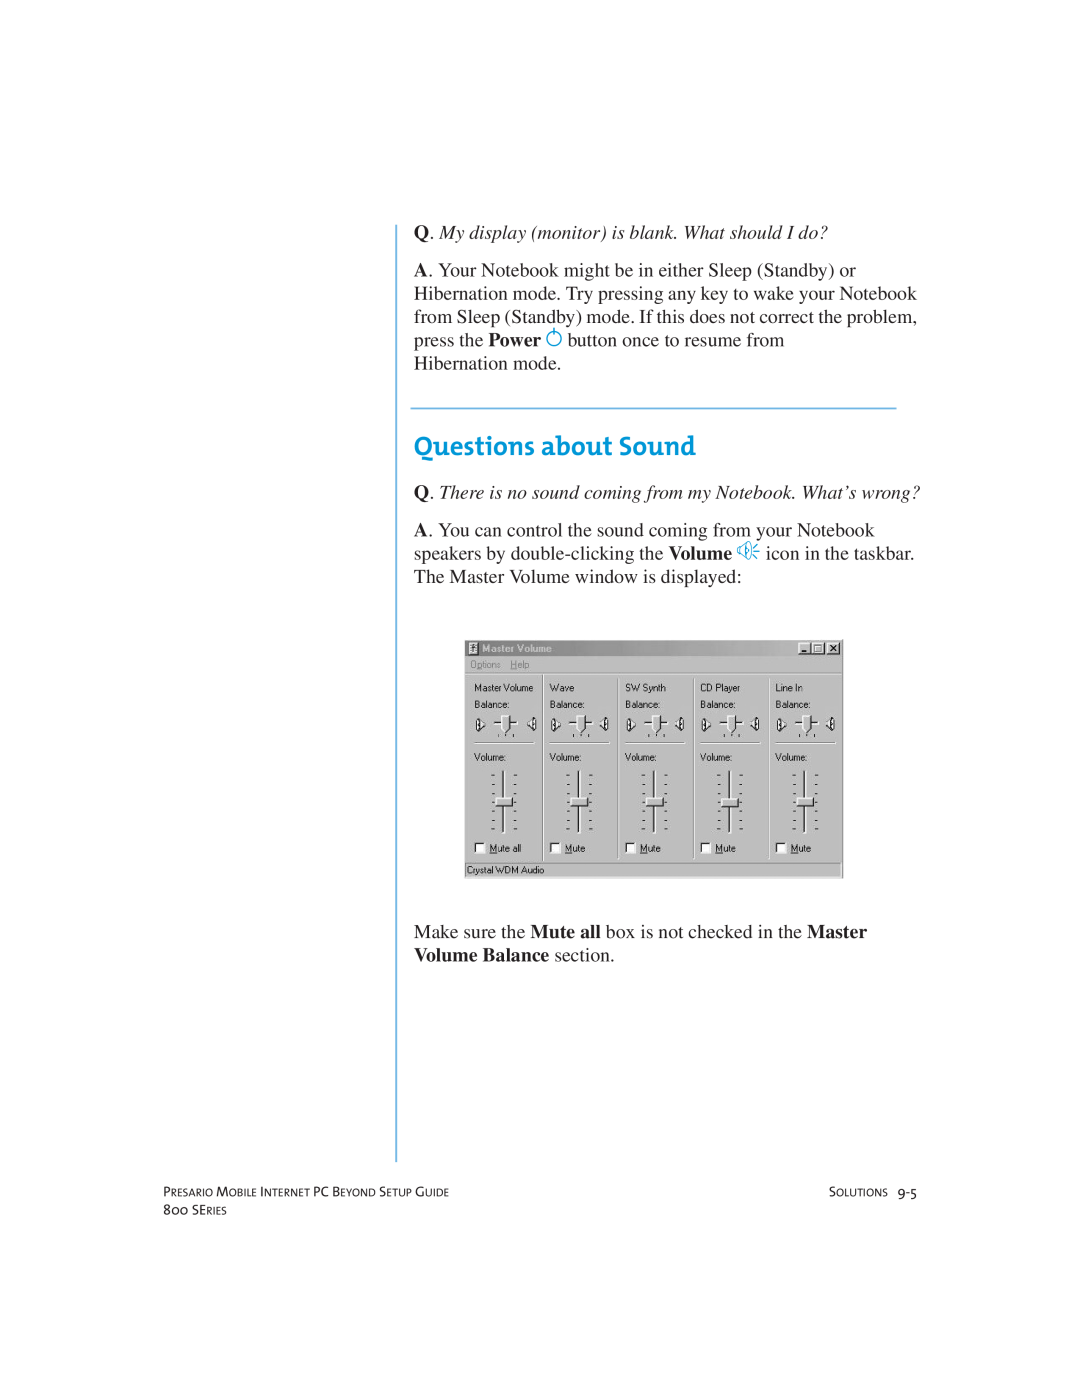 Compaq 800 manual Questions about Sound, Volume Balance section 